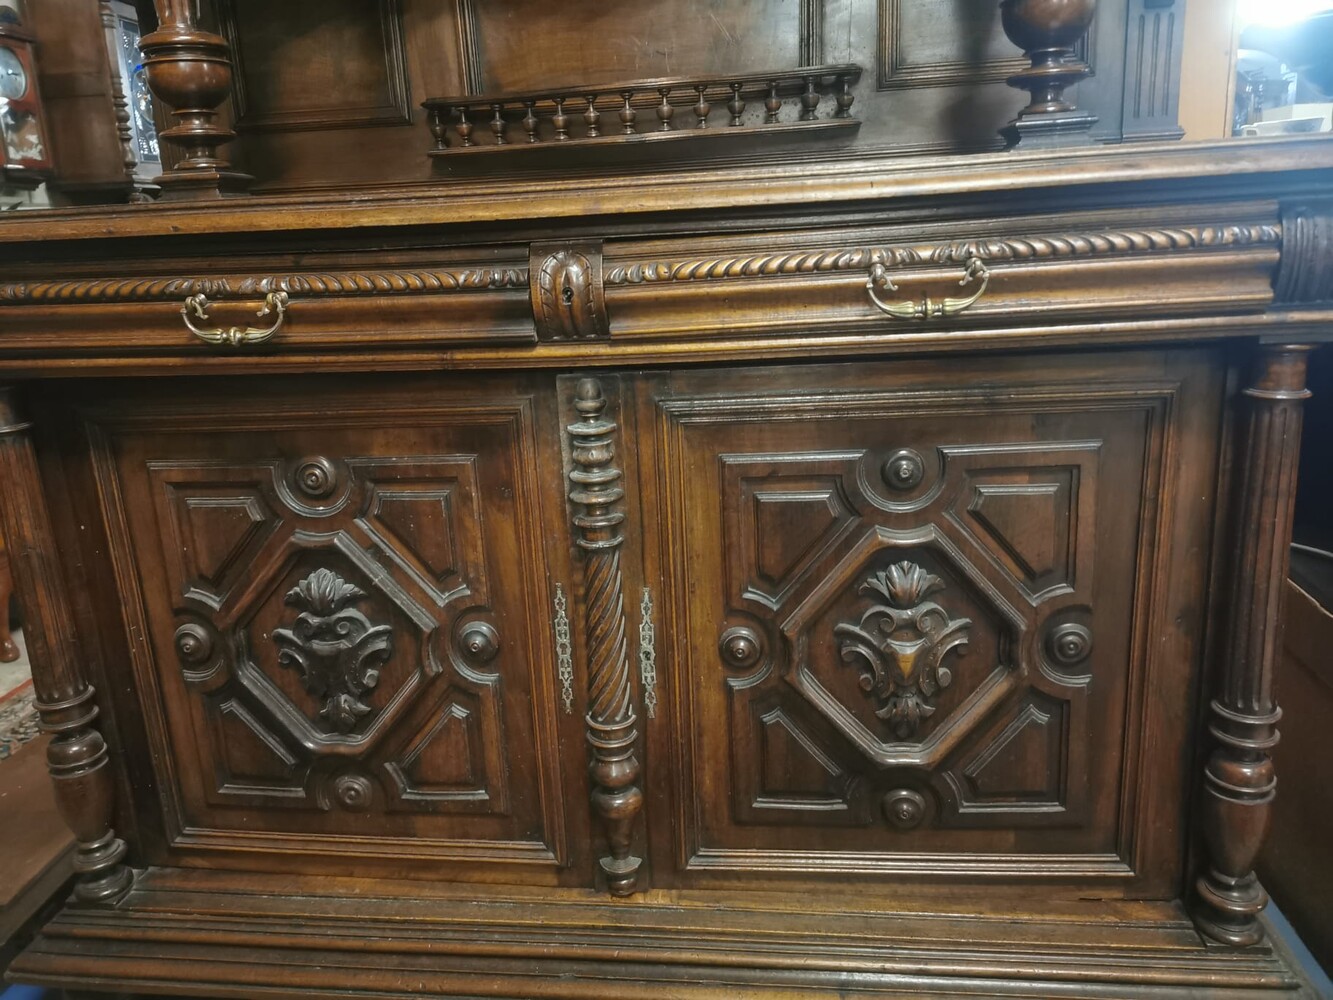 Elegance Unveiled: Exquisite French Walnut Cabinet with Masterful Carvings